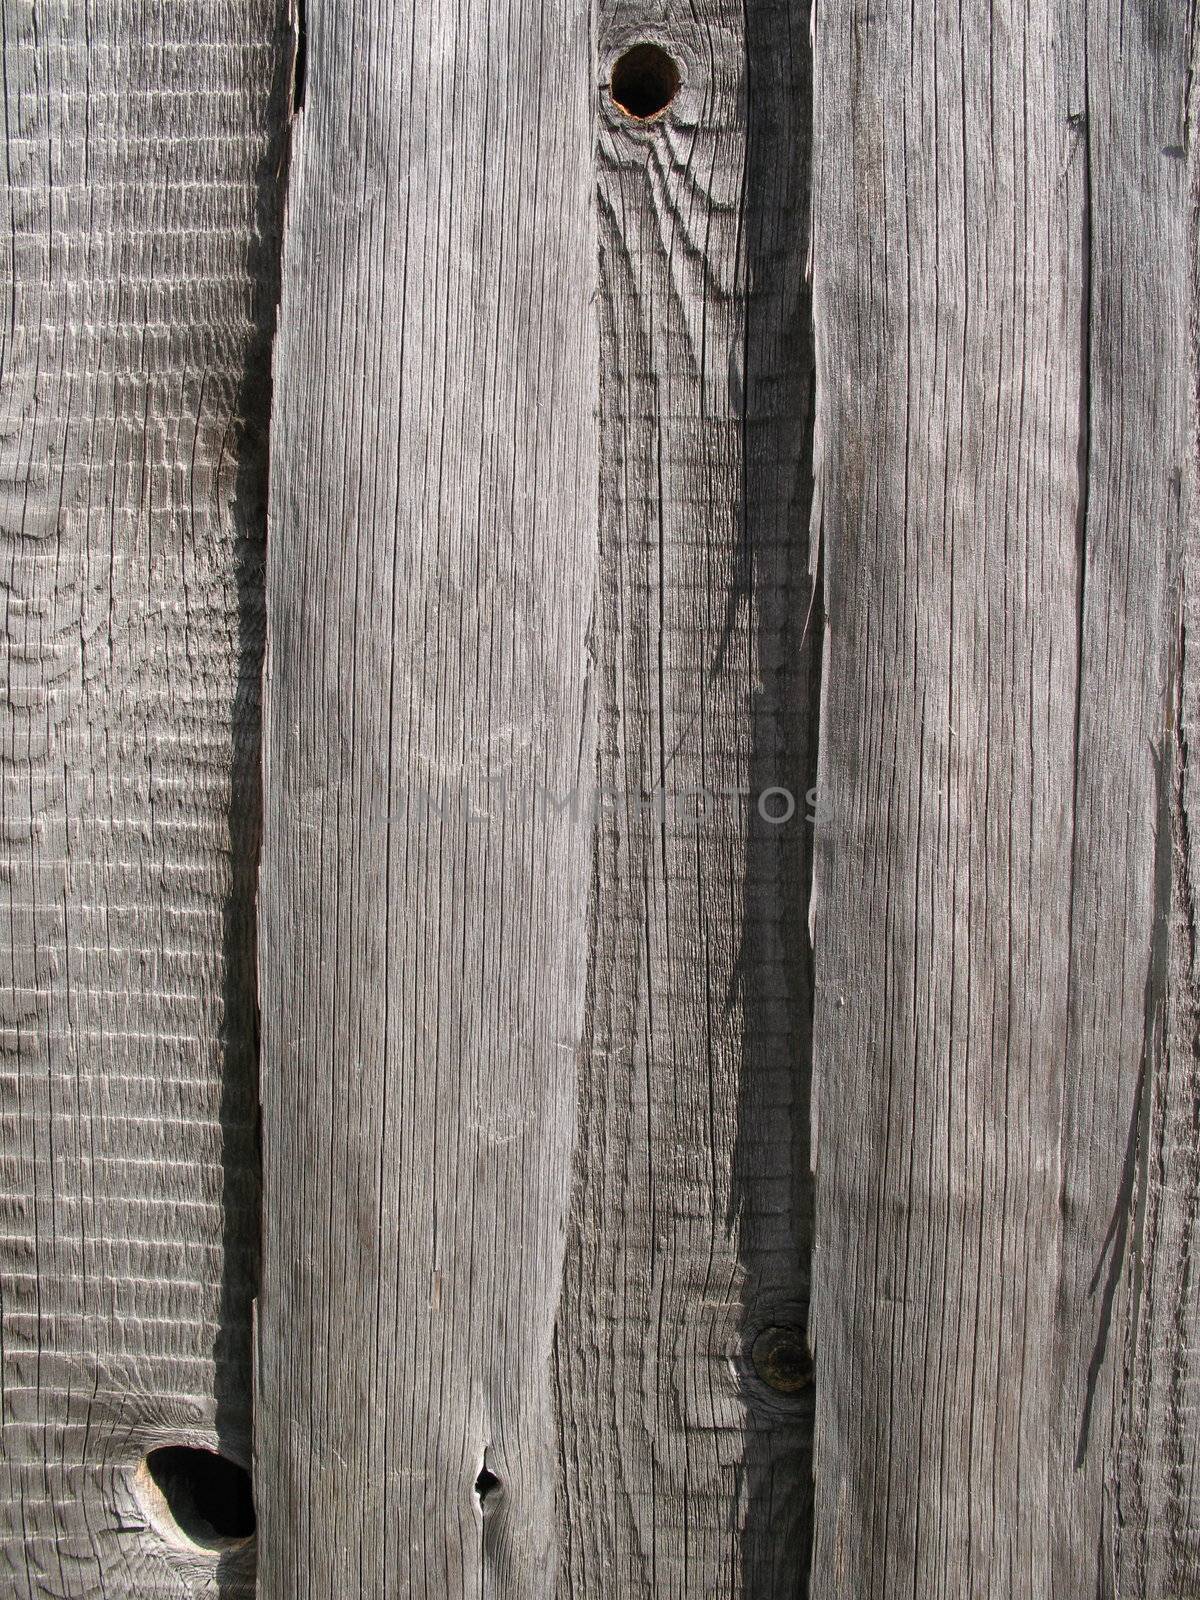 Old wood wall background